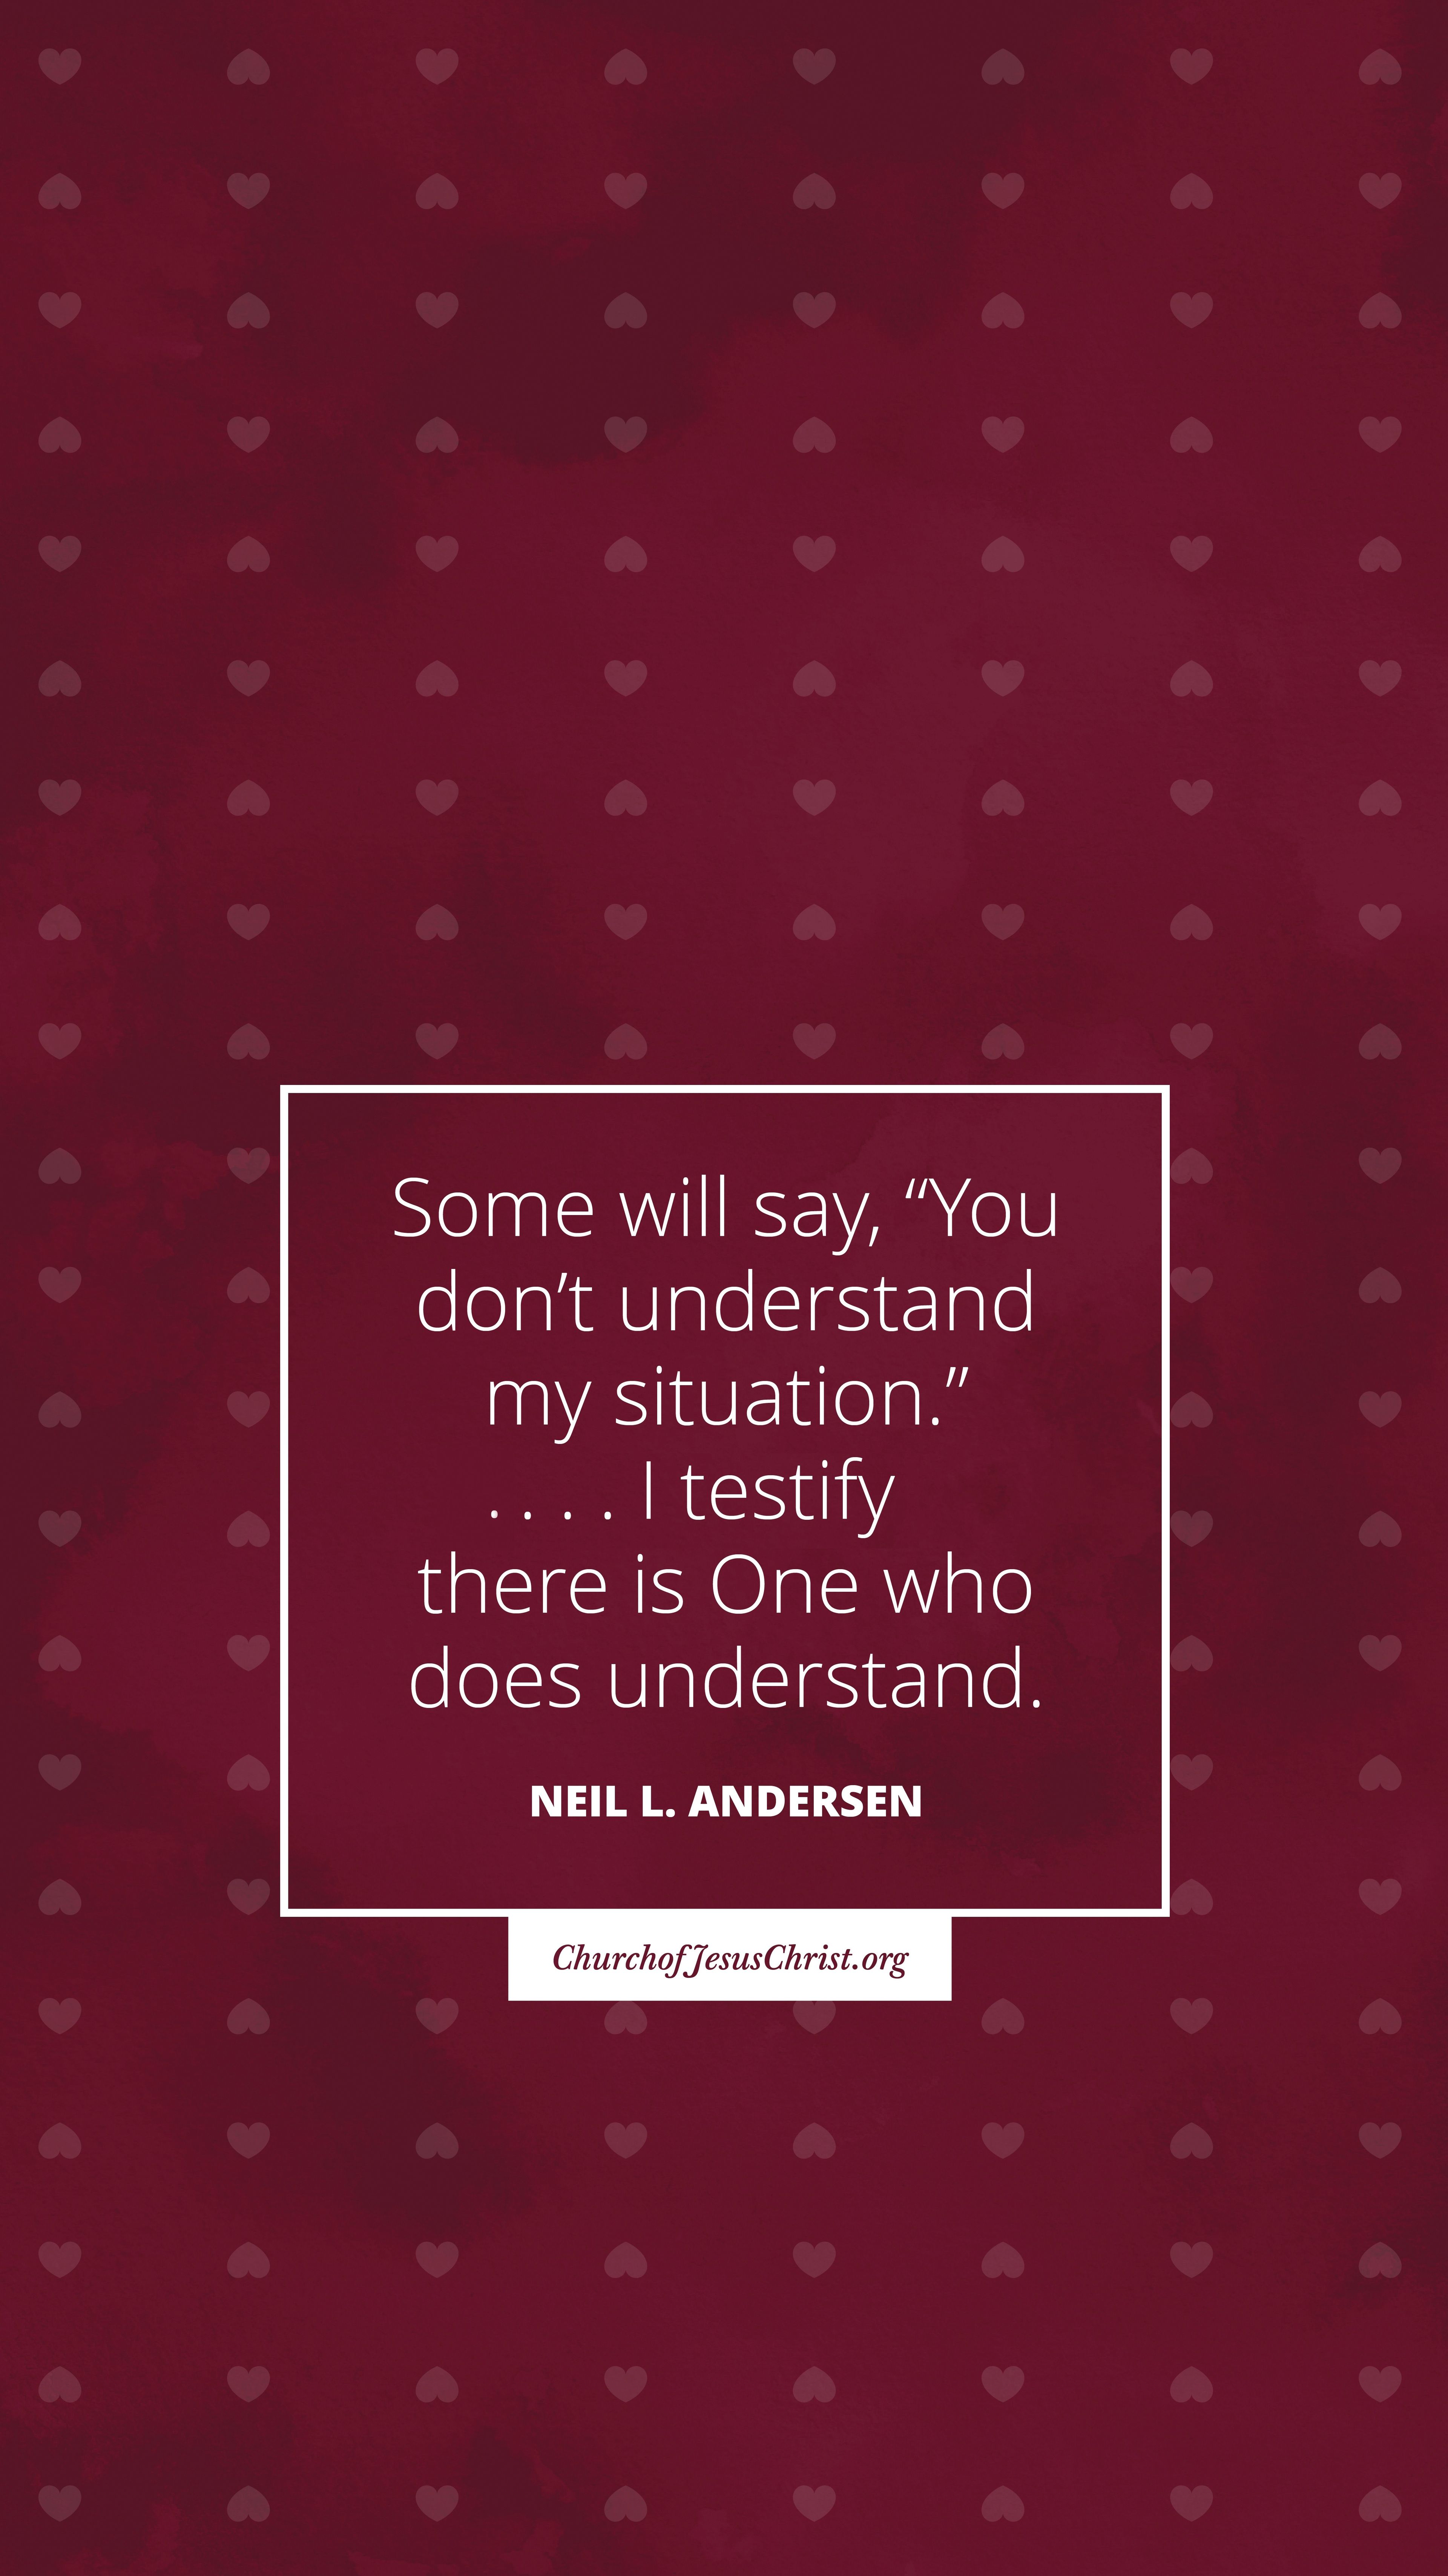 "Some will say, 'You don't understand my situation.' I testify that there is One who does understand." —Neil L. Andersen